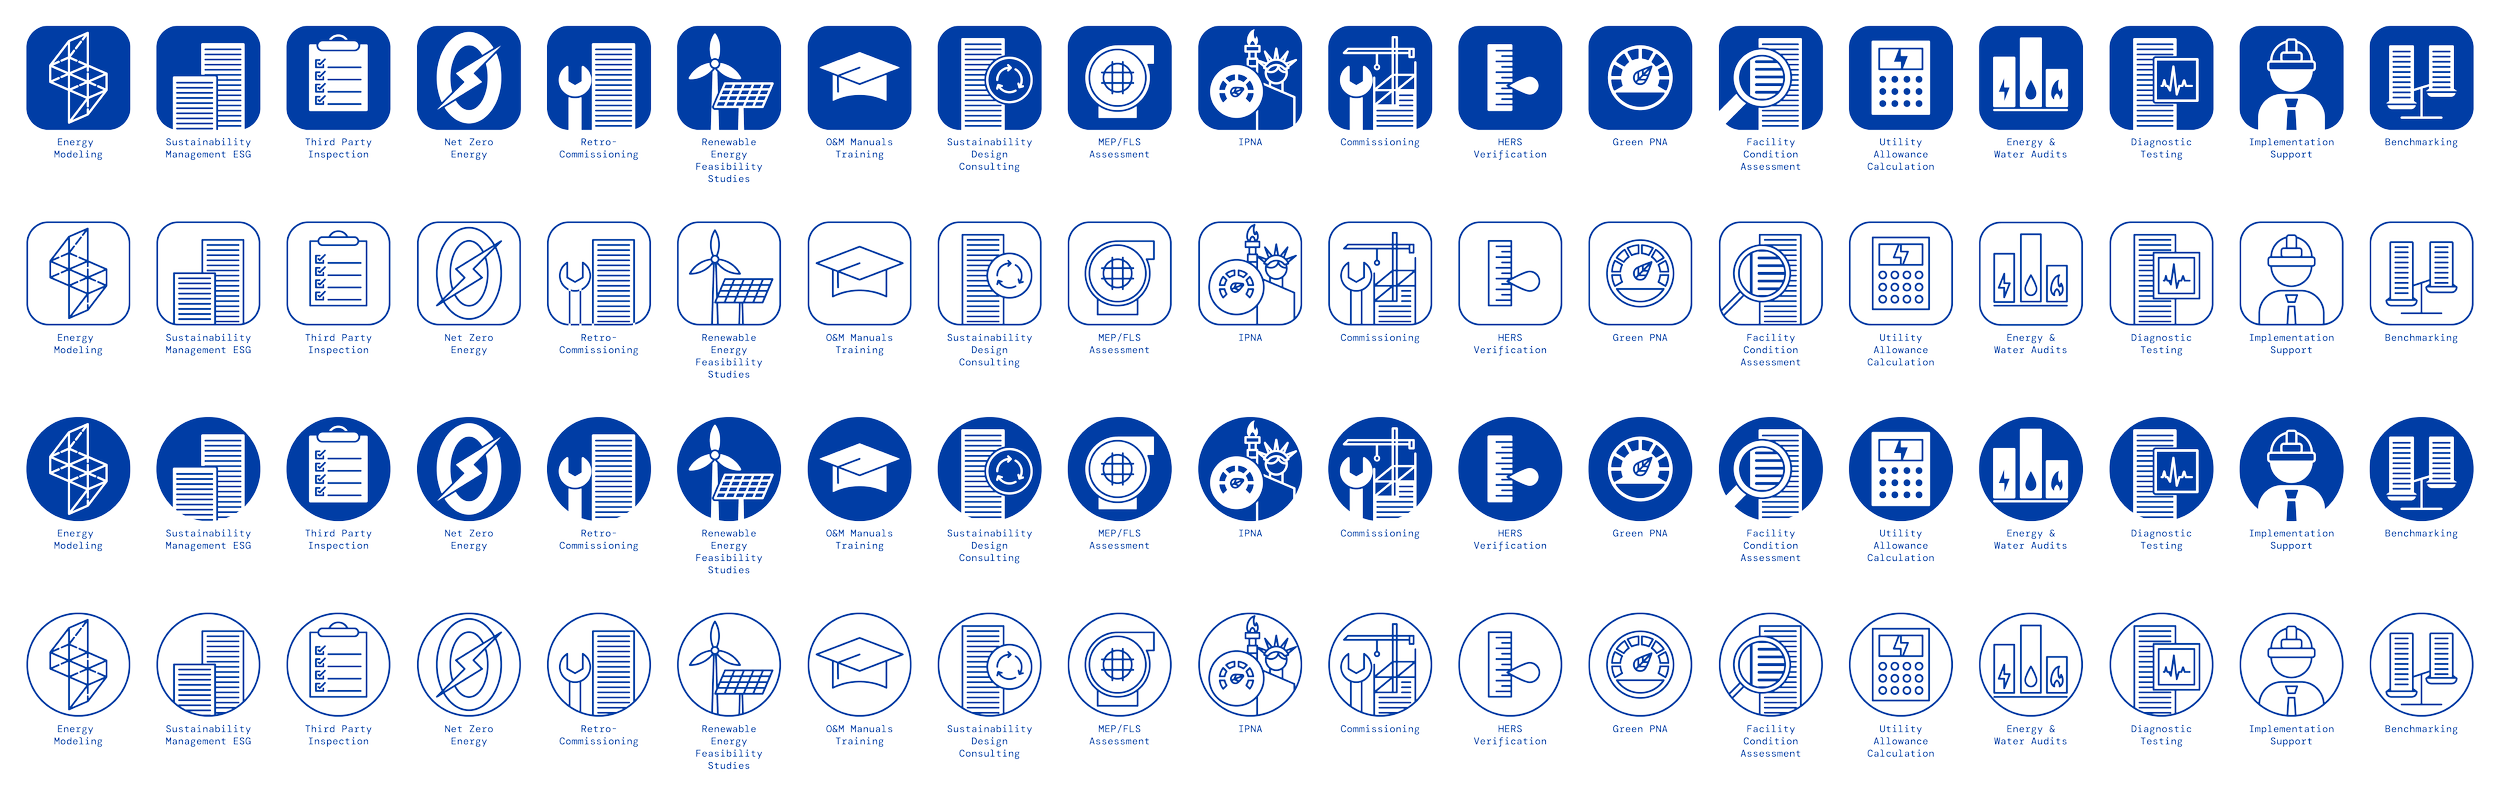 PTE Icons - Arranged-02.png